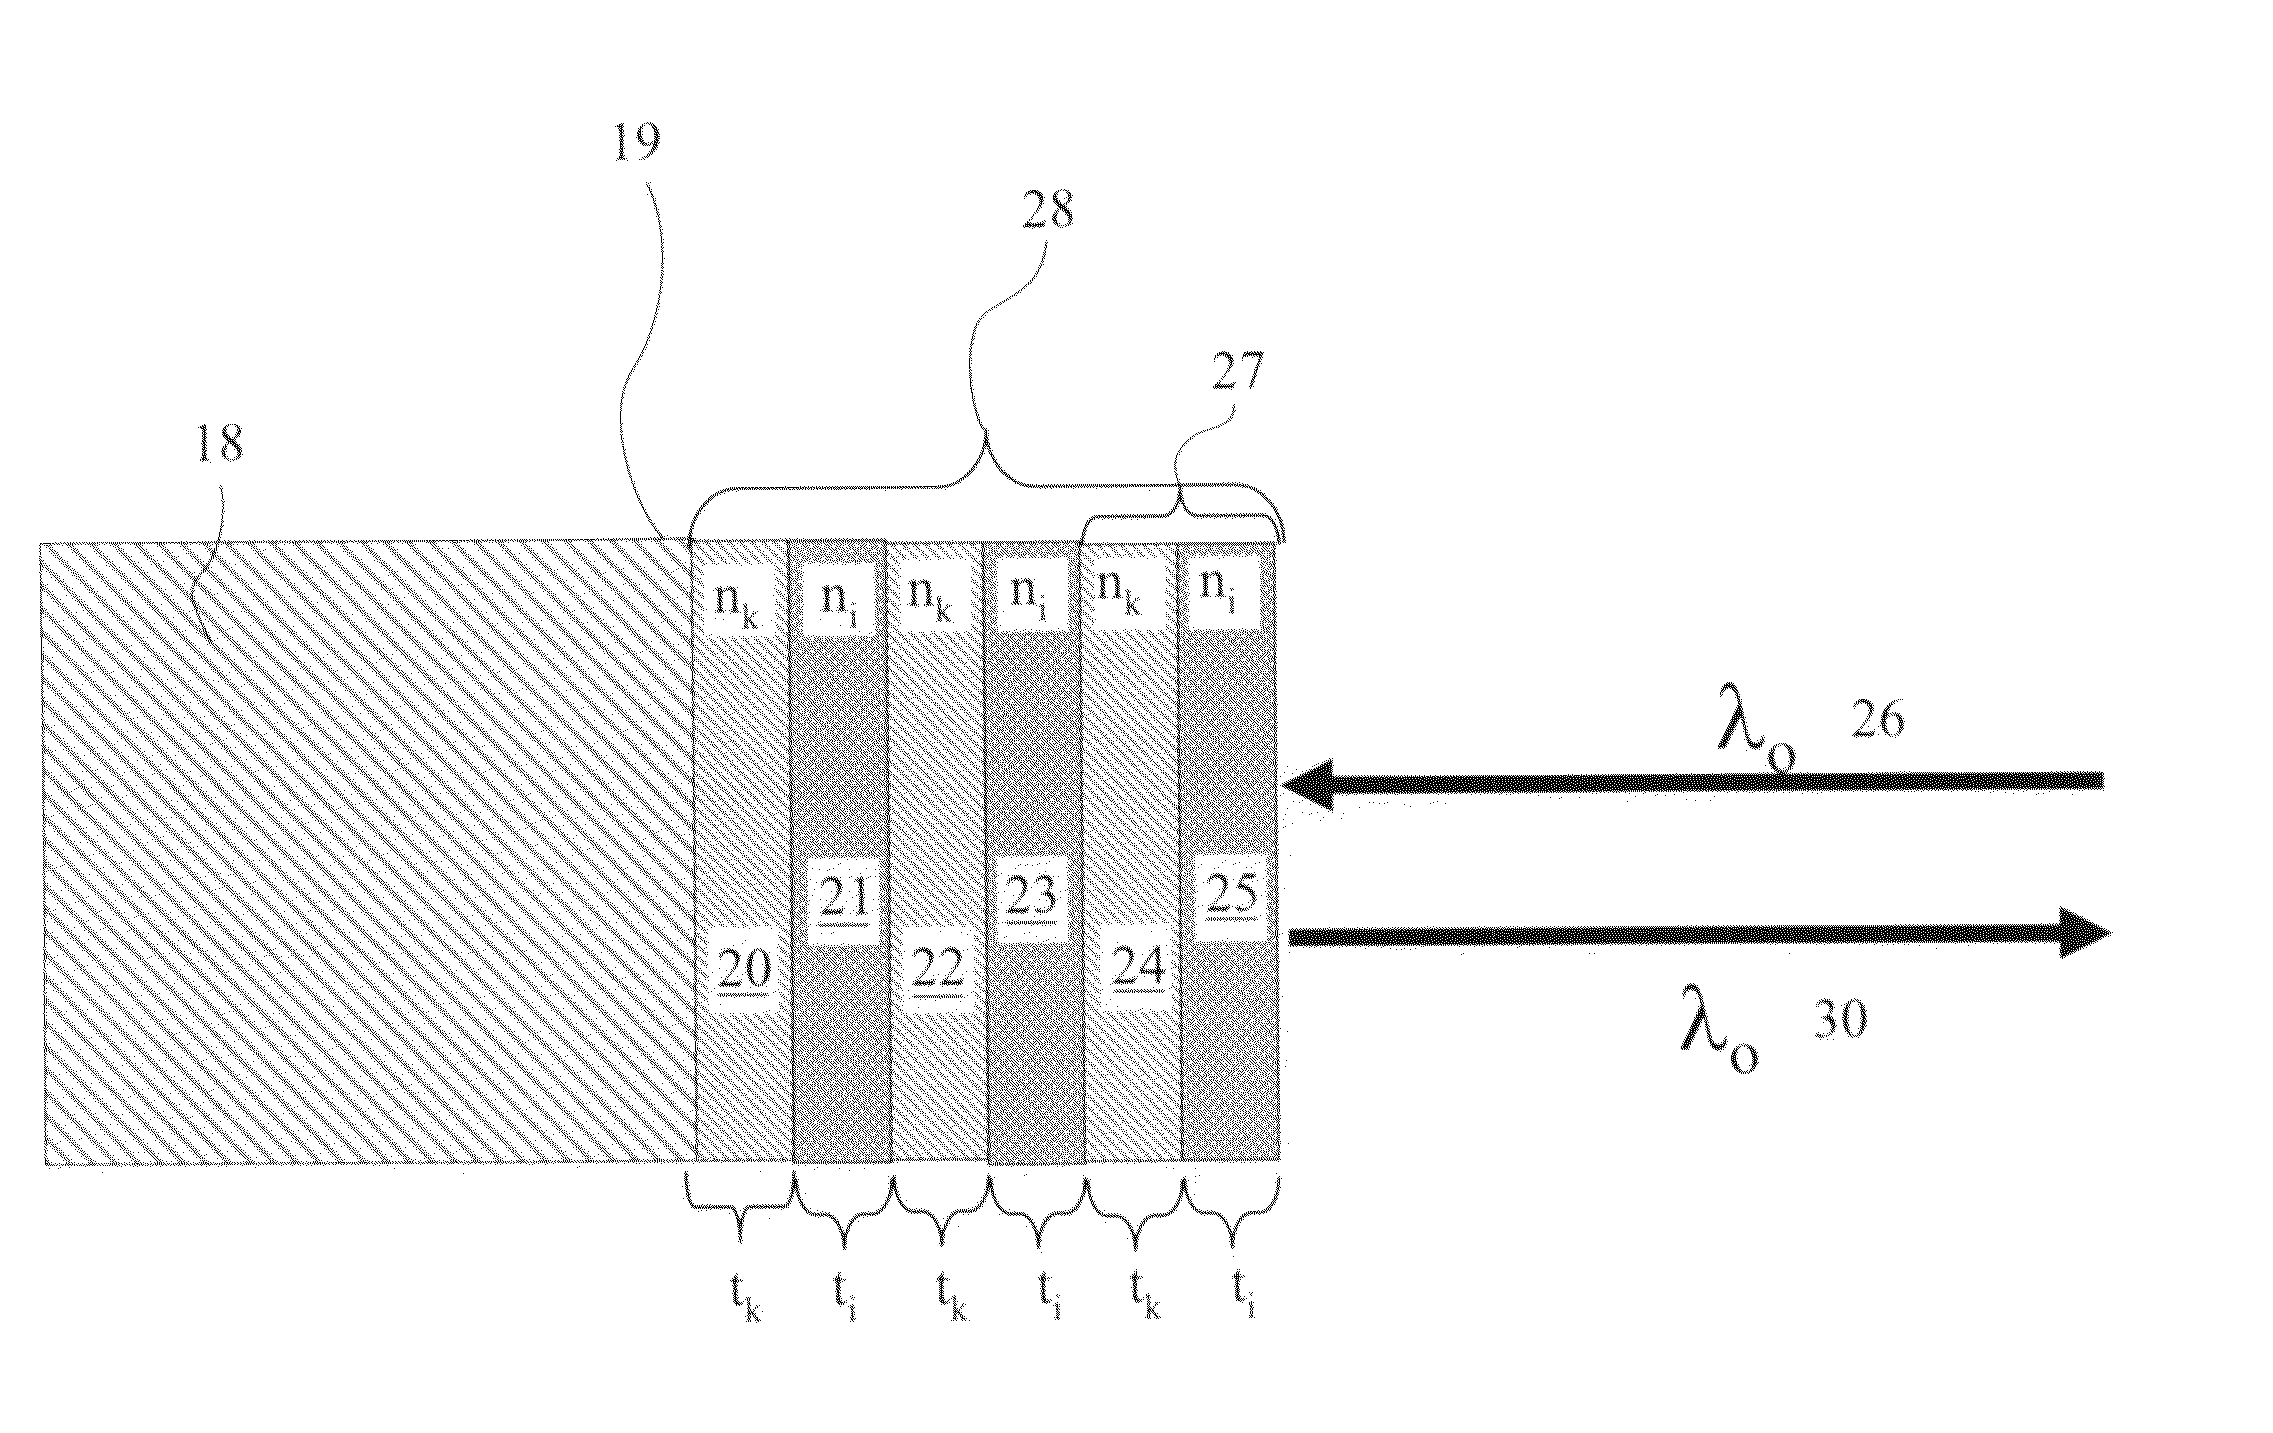 Method of reflecting impinging electromagnetic radiation and limiting heating caused by absorbed electromagnetic radiation using engineered surfaces on macro-scale objects